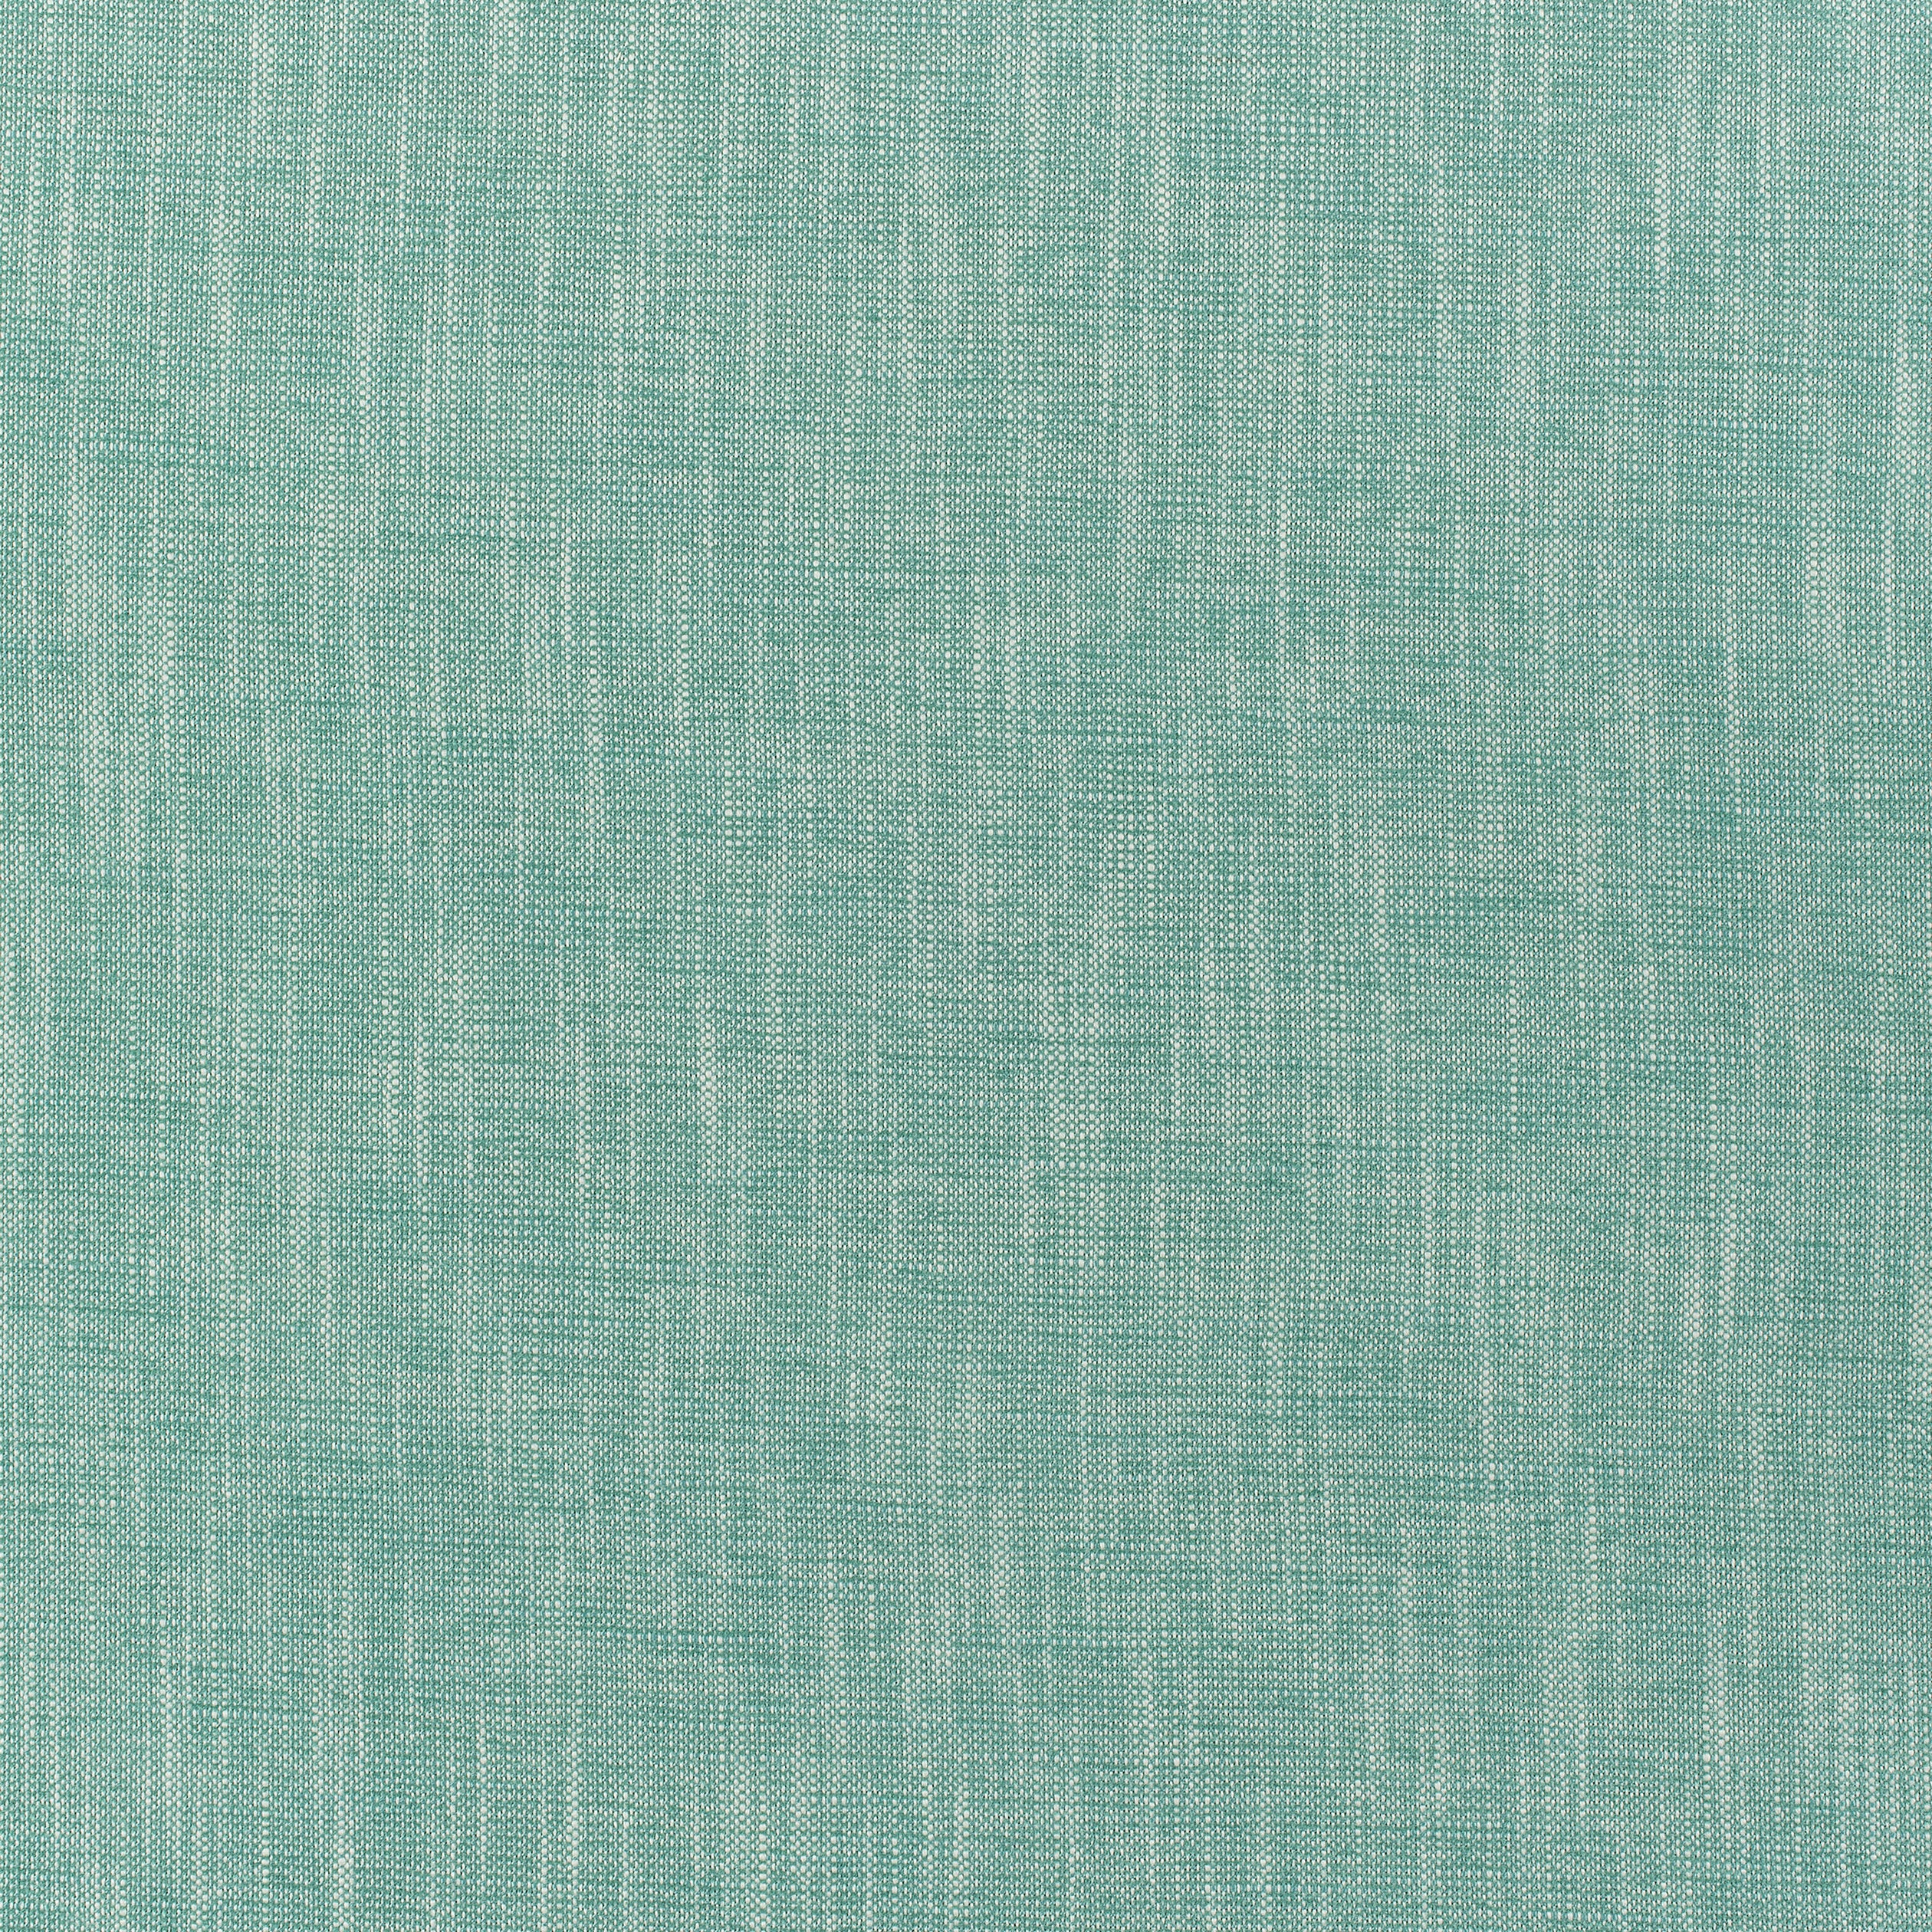 Bailey fabric in malachite color - pattern number W80498 - by Thibaut in the Mosaic collection